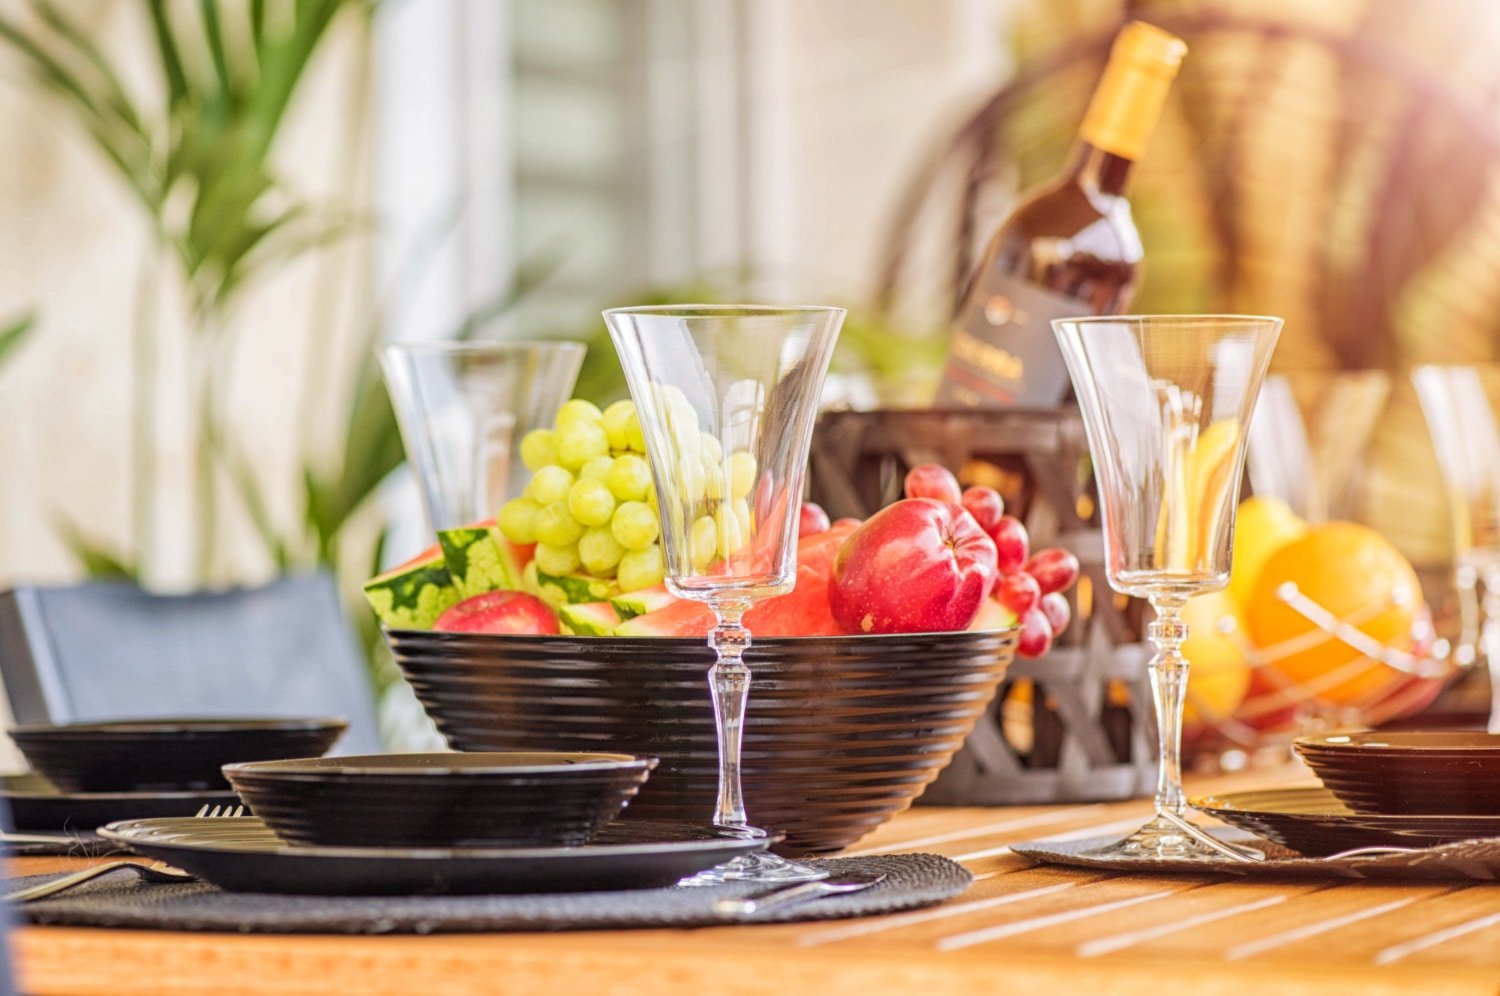 You are currently viewing Serve Meals In Style With Duralex USA’s Durable Glassware